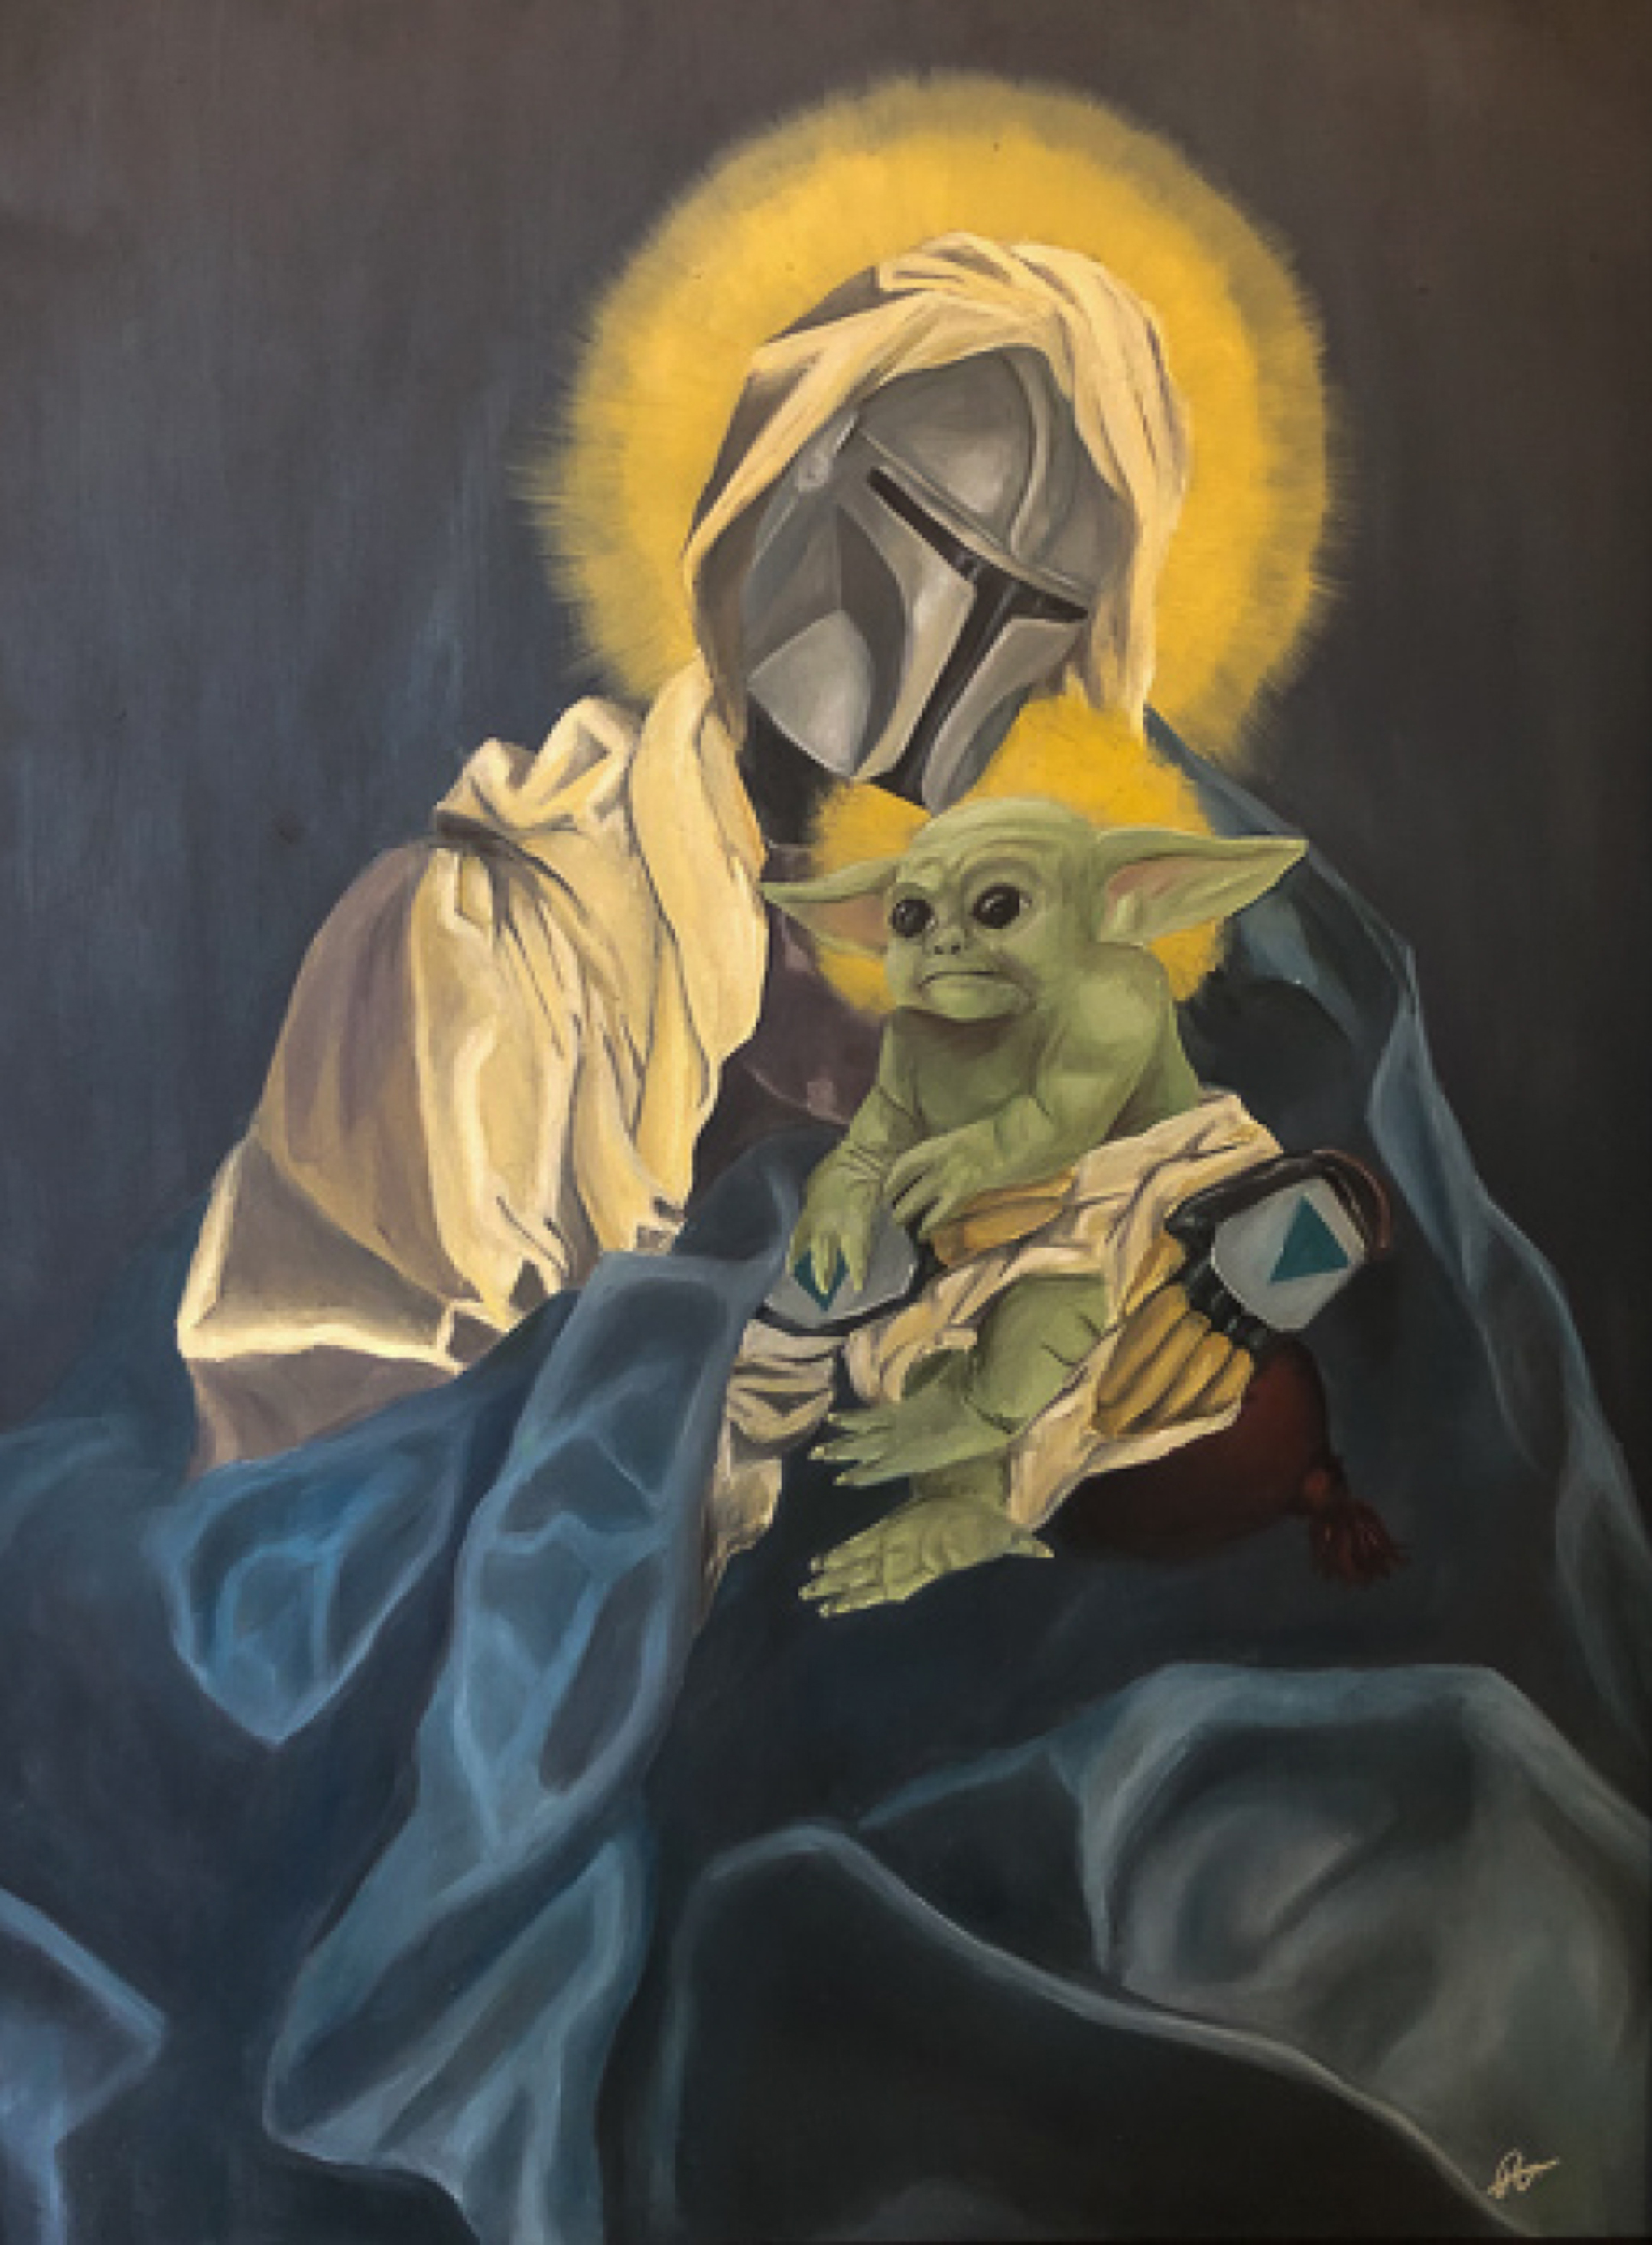 painting of the mandalorian, from star wars, clothed in biblical garb with a halo around his helmeted head, cradling baby yoda